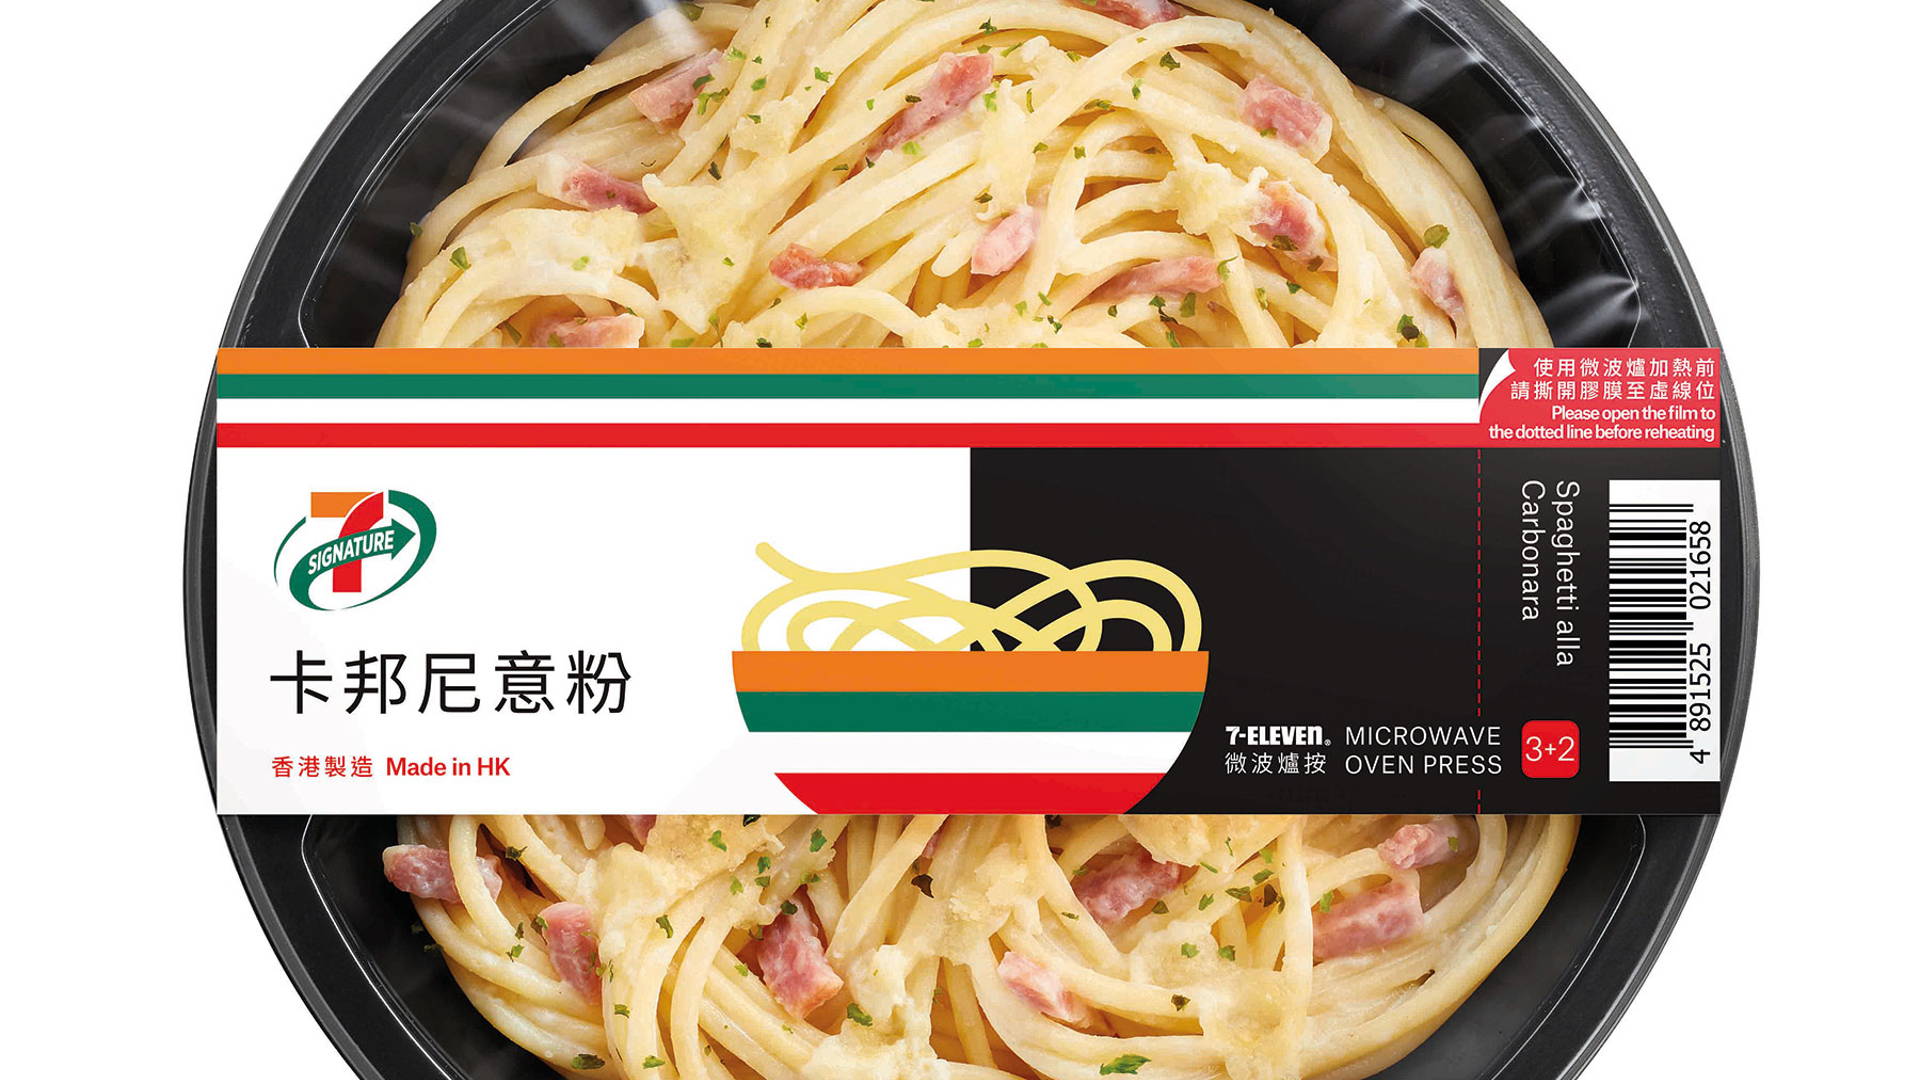 Featured image for Check Out This Adorable Packaging For 7-Eleven Hong Kong